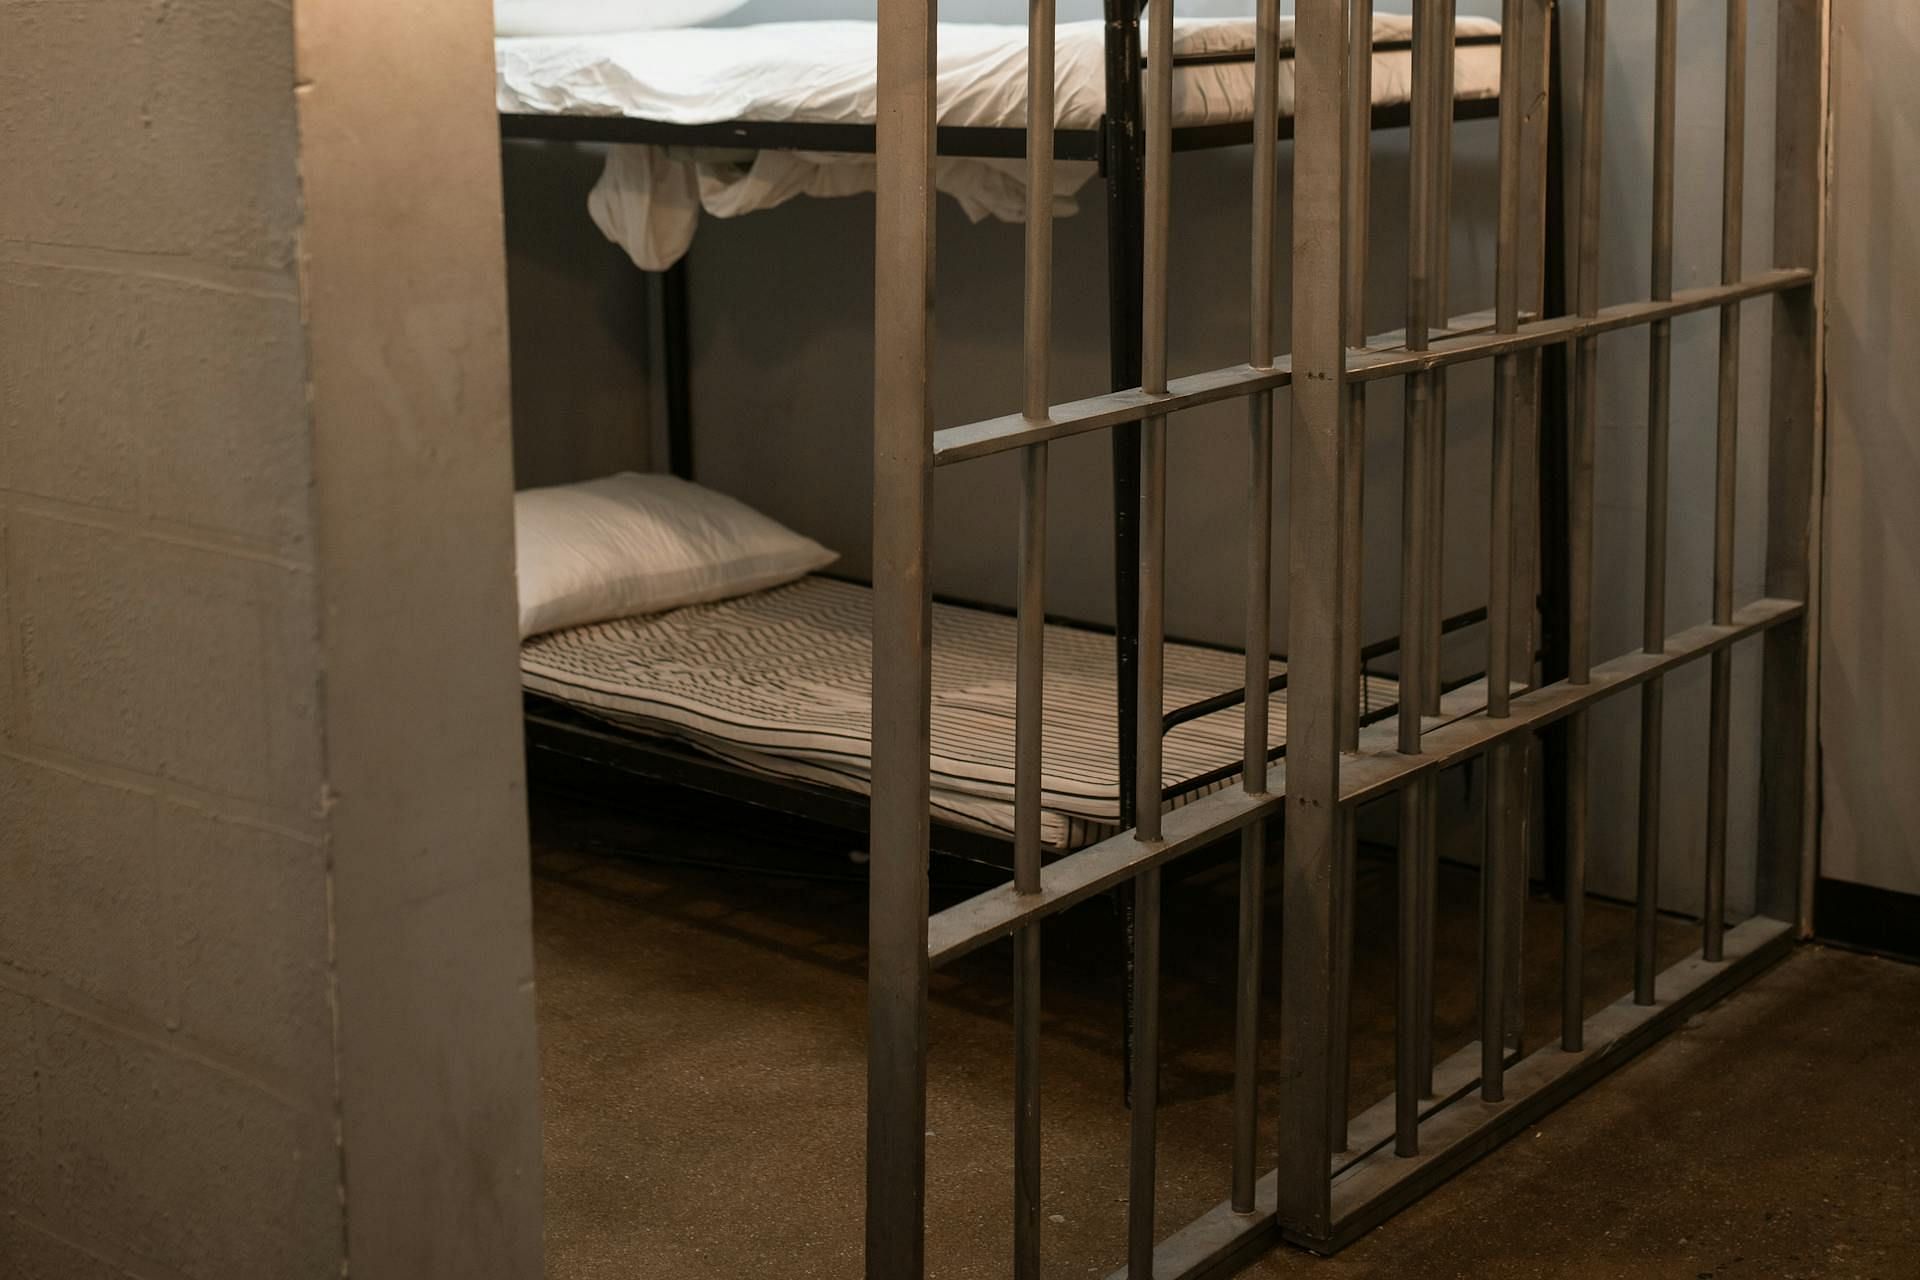 Teen inmate Annelise Sanderson was found dead in her prison cell (Image via Pexels)